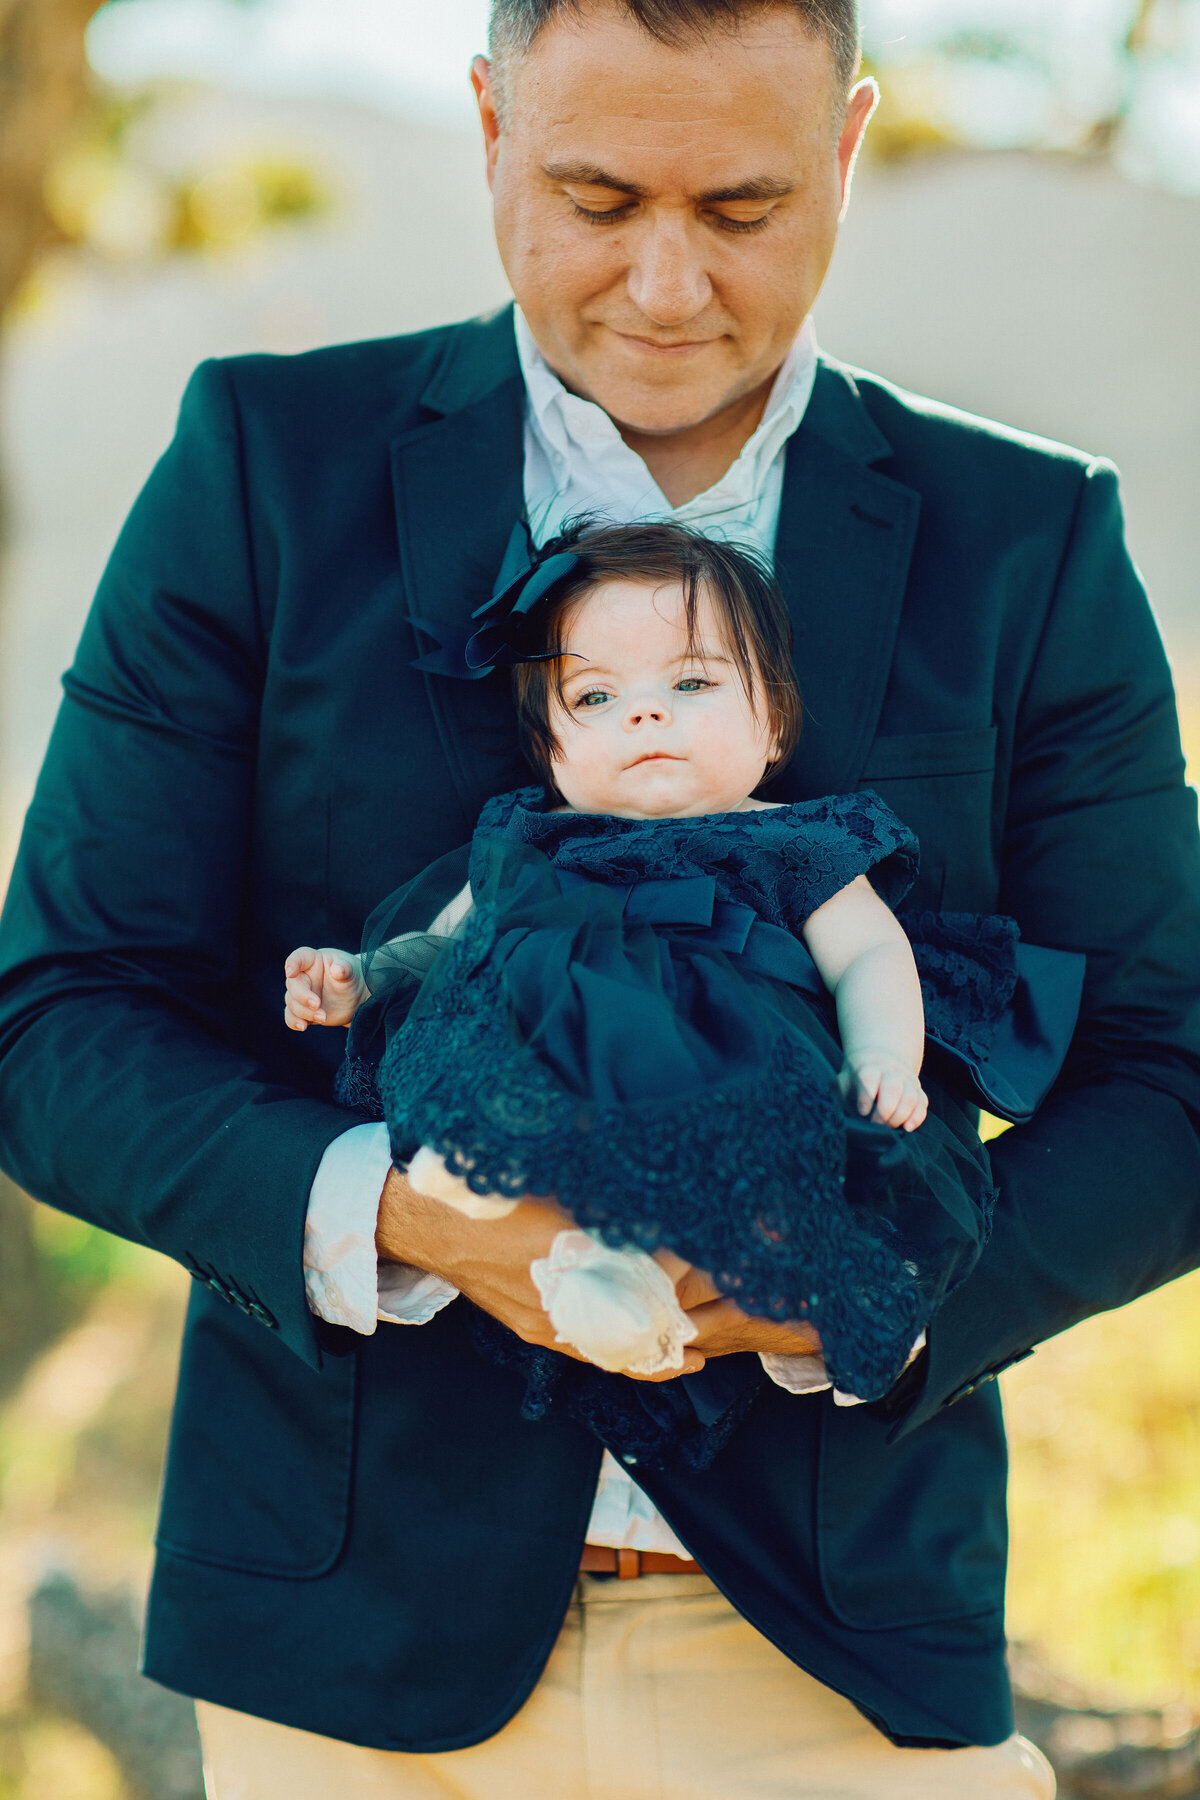 Family Portrait Photo Of Father And Baby In Blue Outfit Los Angeles